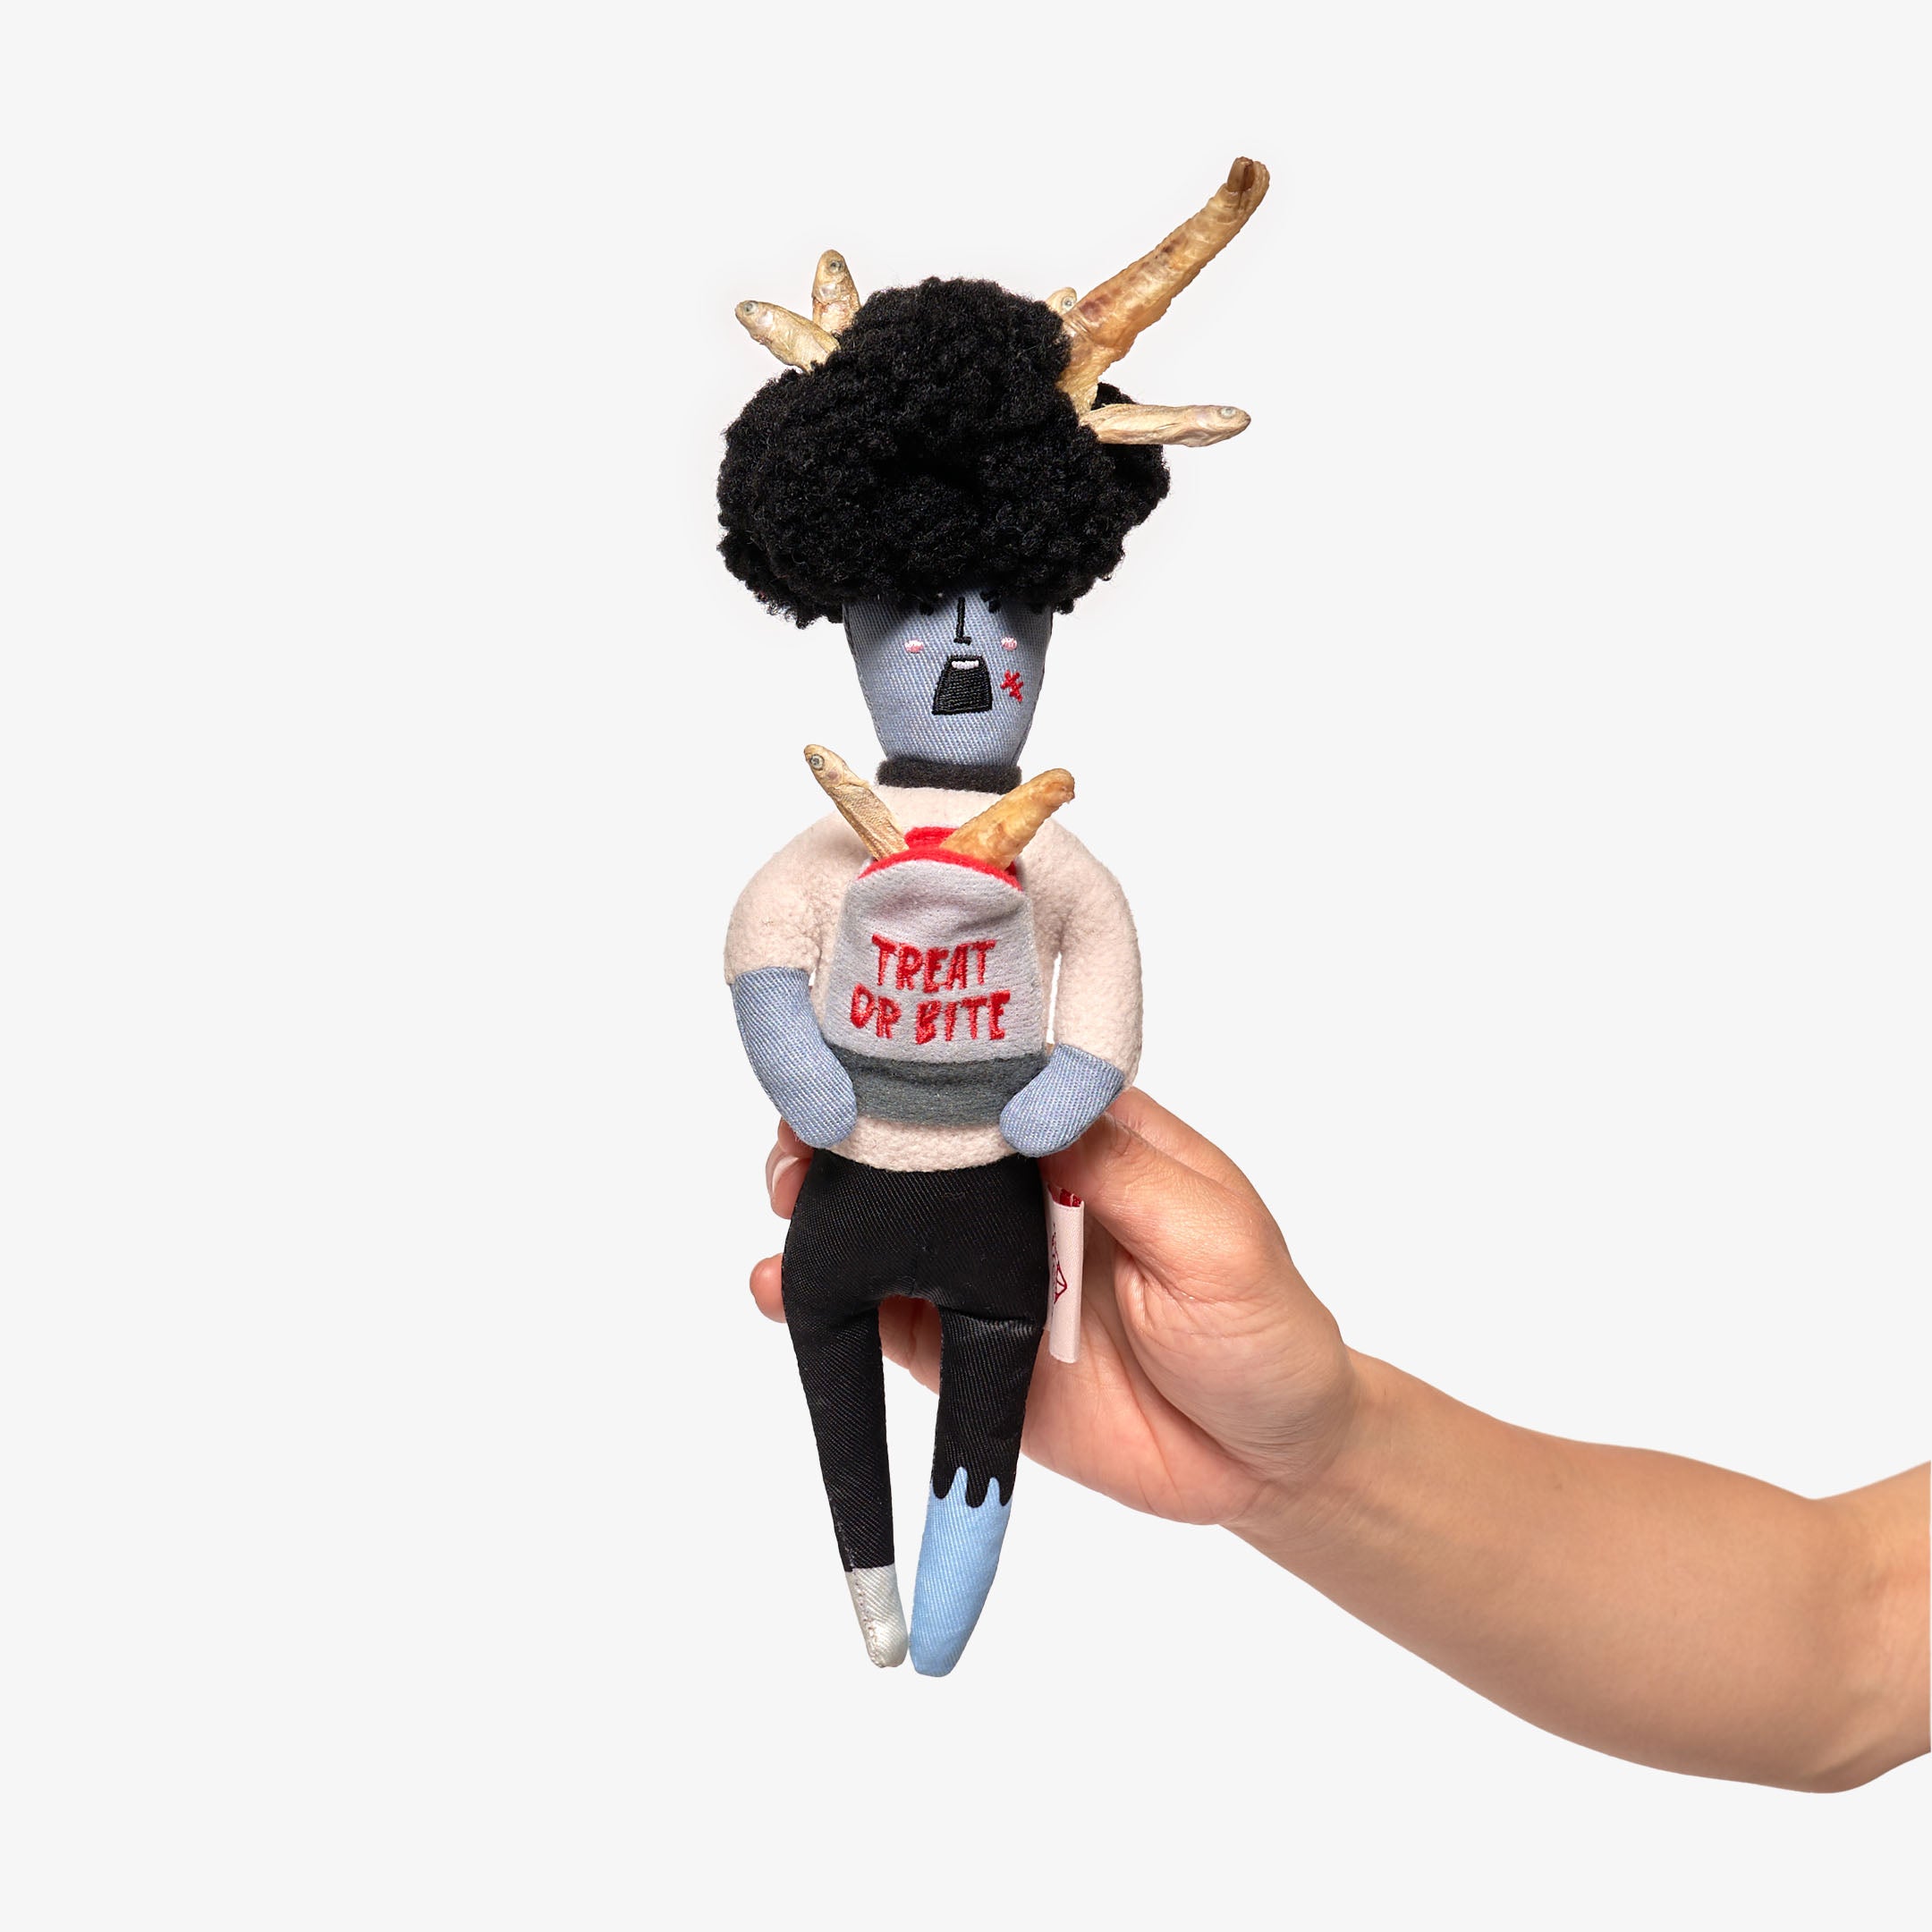 The photo displays a hand holding a whimsical dog toy with a zombie theme, featuring antlers, a black curly hairdo, and a slogan "TREAT OR BITE" on its torso. This interactive toy is designed for nosework, encouraging dogs to sniff out hidden treats. The light background highlights the toy's playful and creative design.